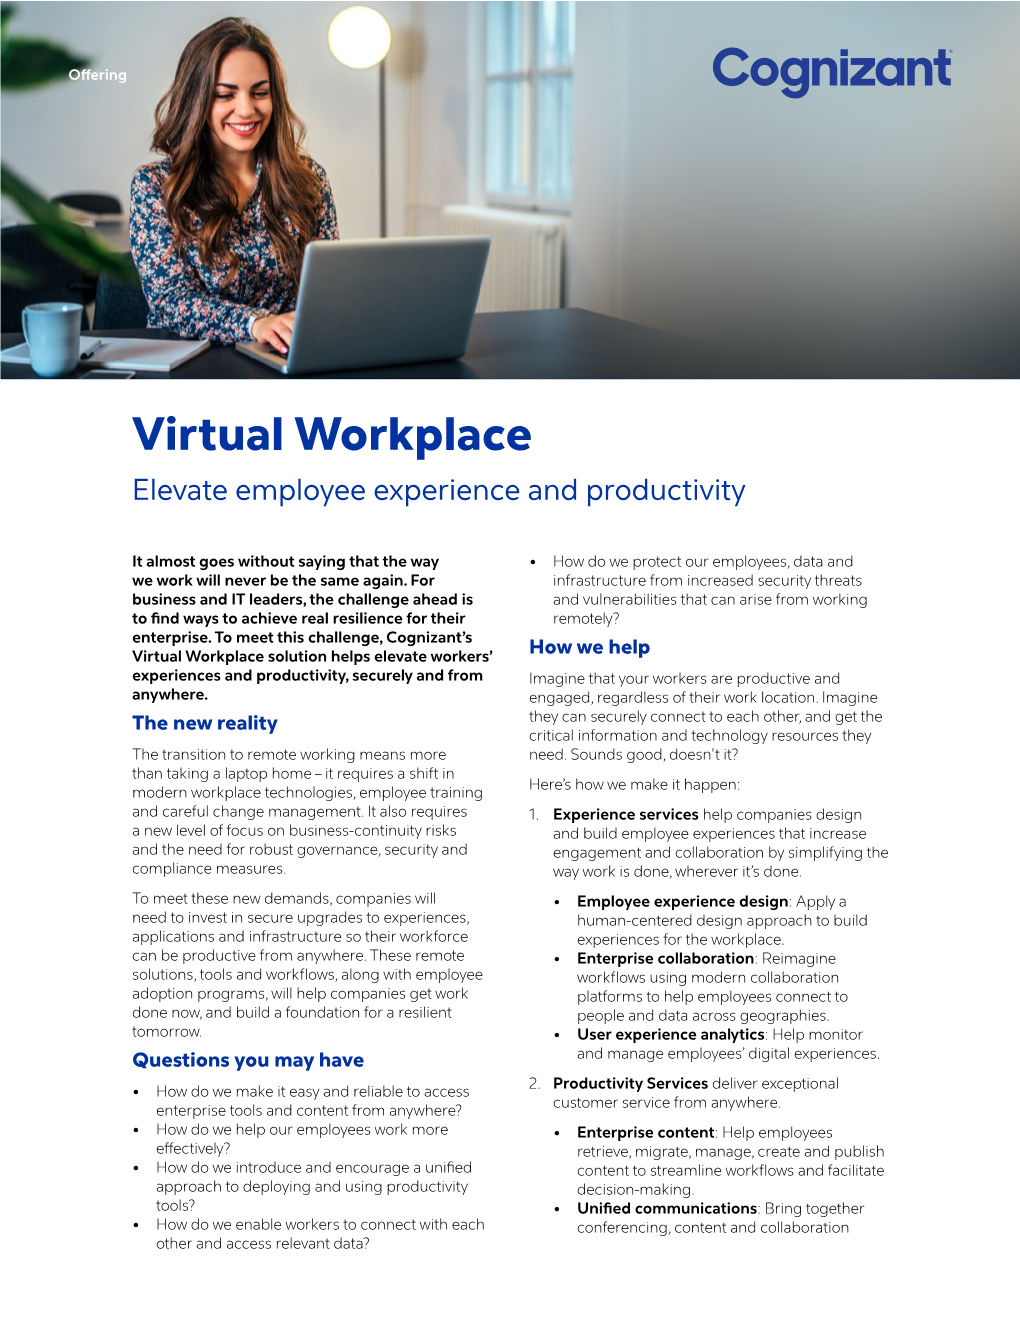 Virtual Workplace Elevate Employee Experience and Productivity